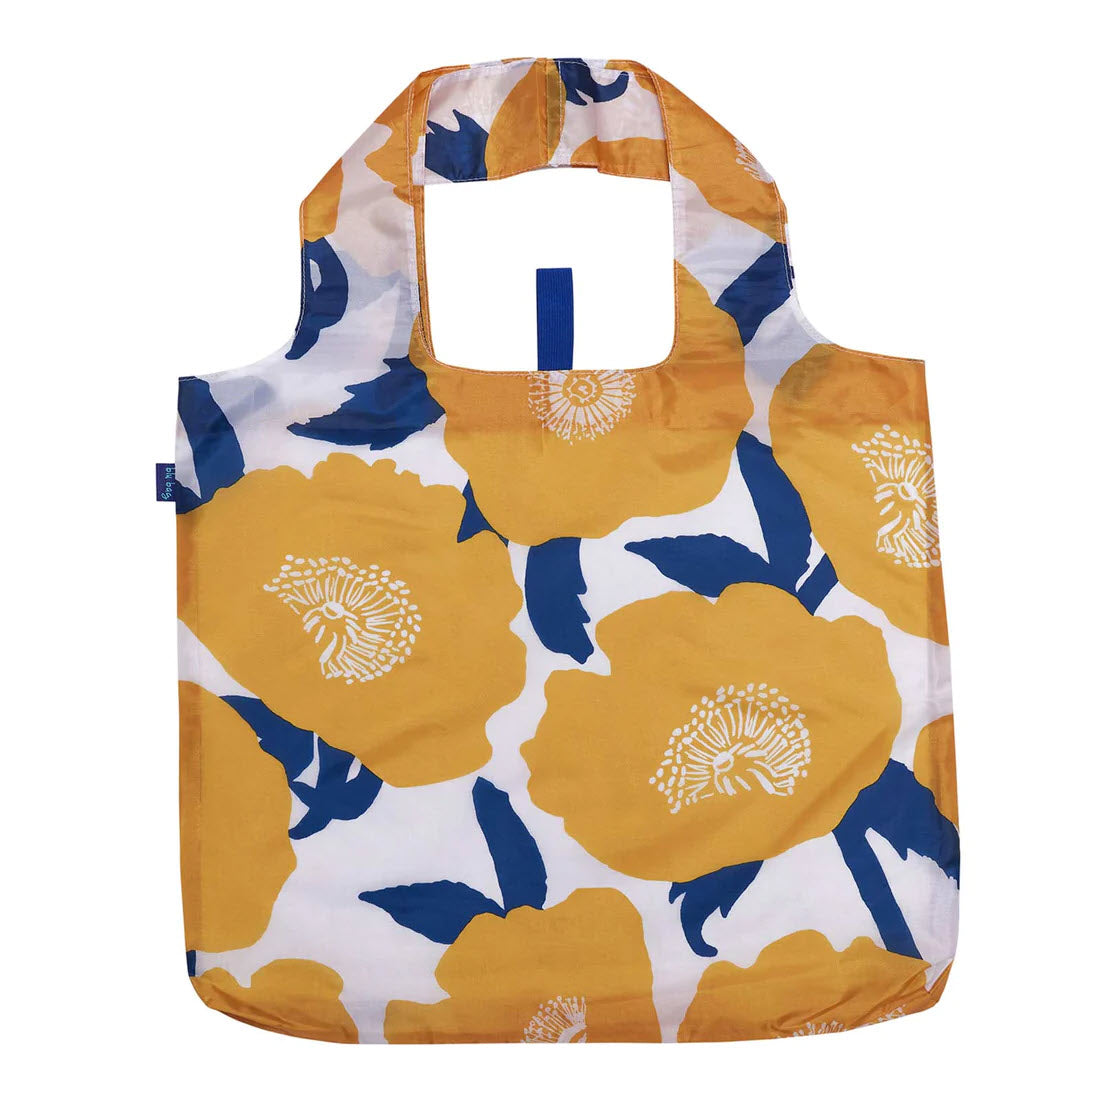 Packable spare bag with a floral pattern in yellow, blue, and white colors, displayed unfolded against a white background. Now introducing the BLU BAG POPPIES by Rockflowerpaper.